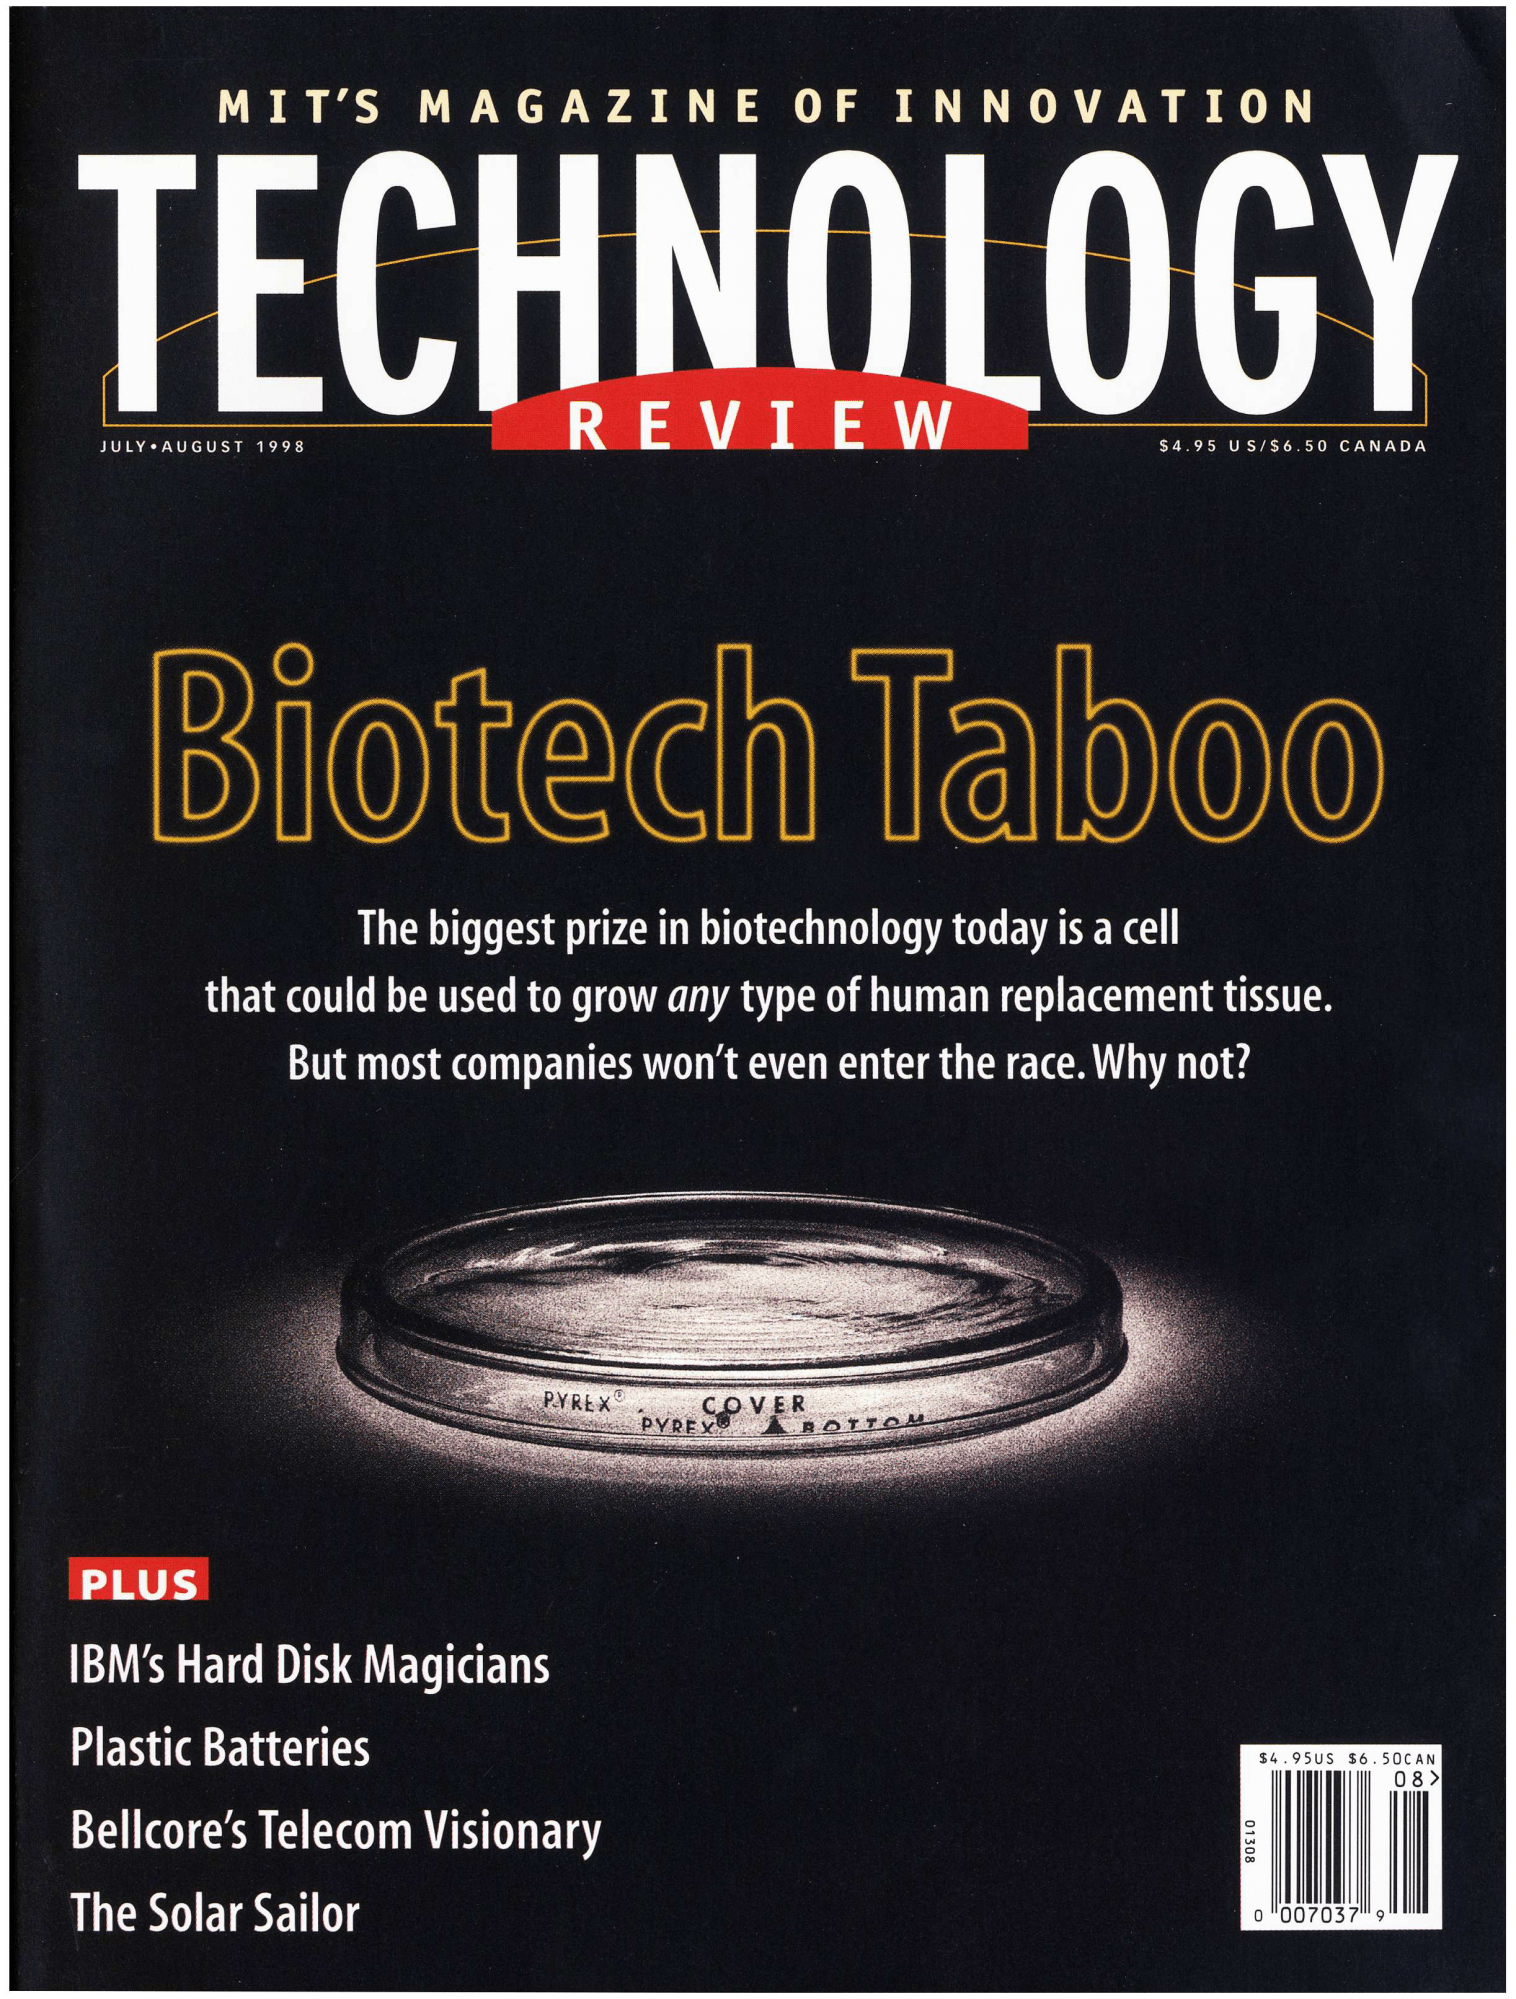 July/August 1998 cover of MIT Technology Review